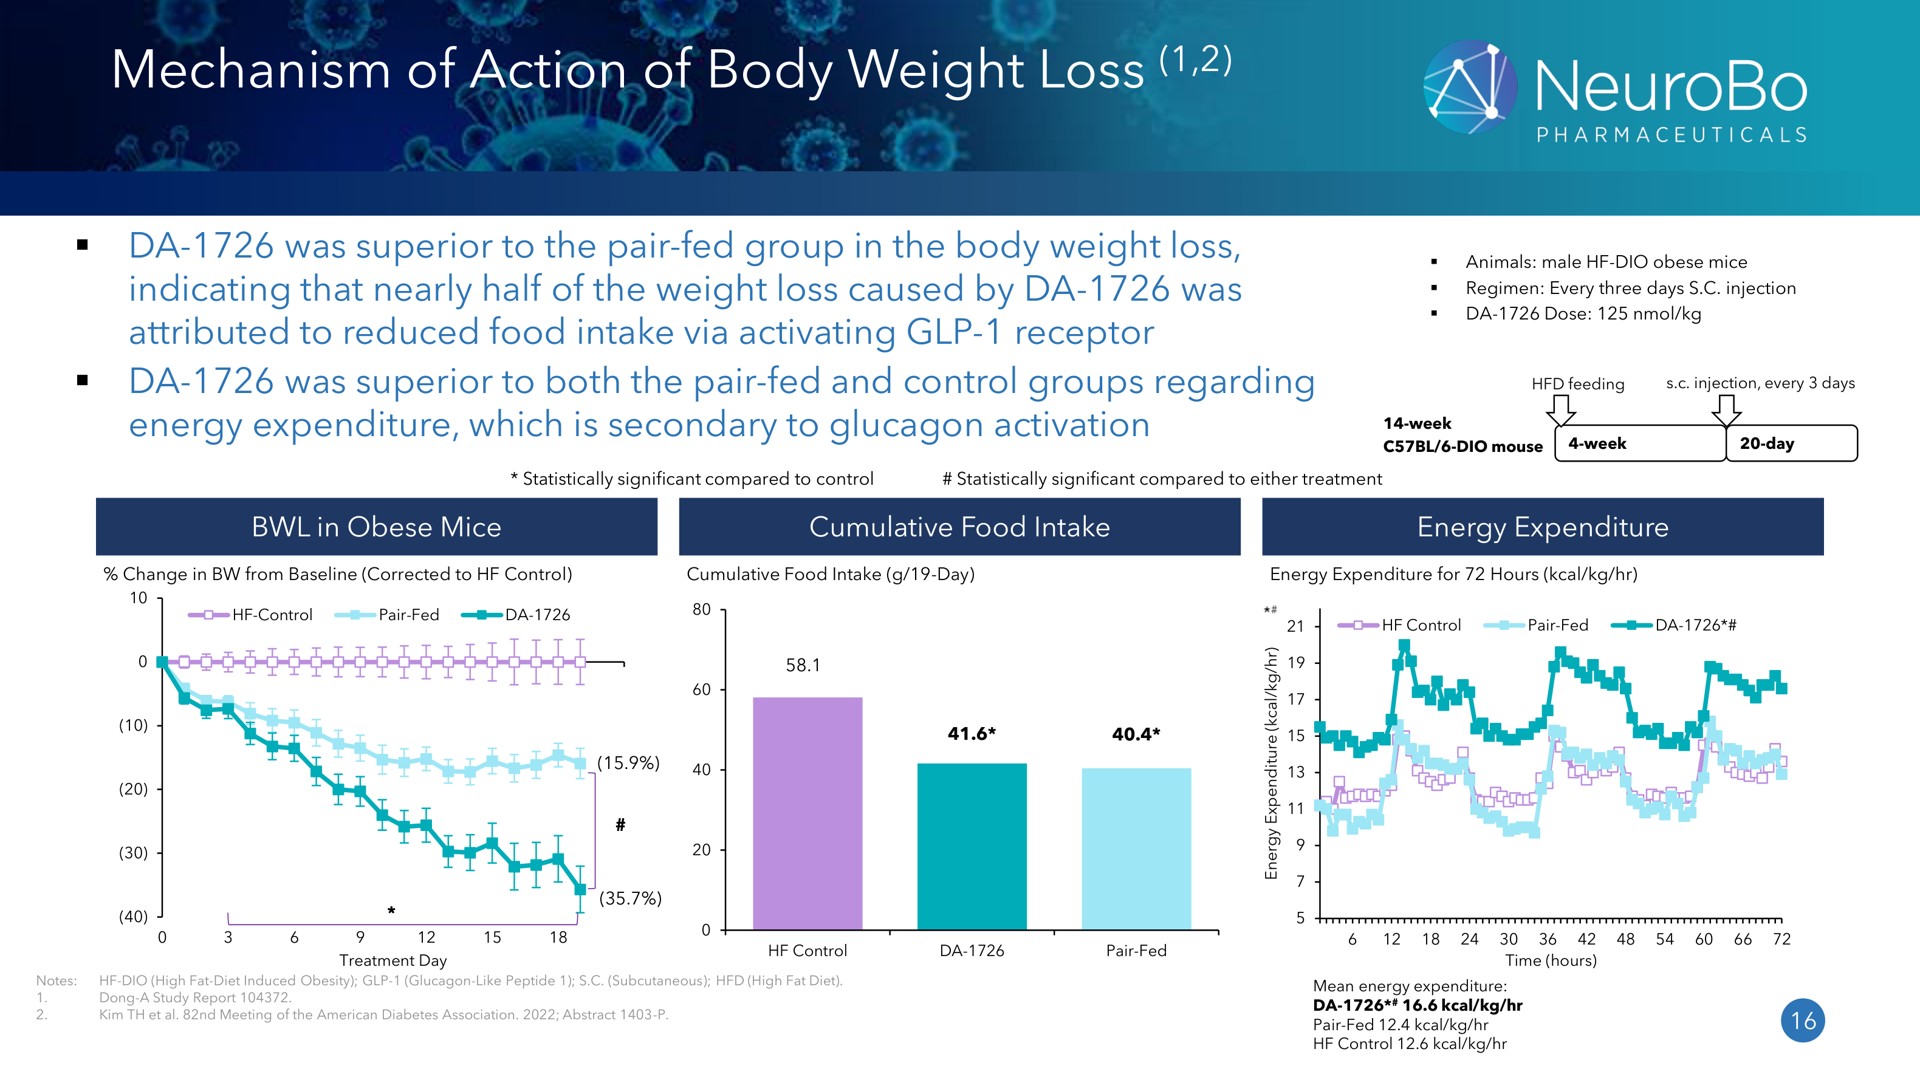 mechanism of action of body weight loss | NeuroBo Pharmaceuticals